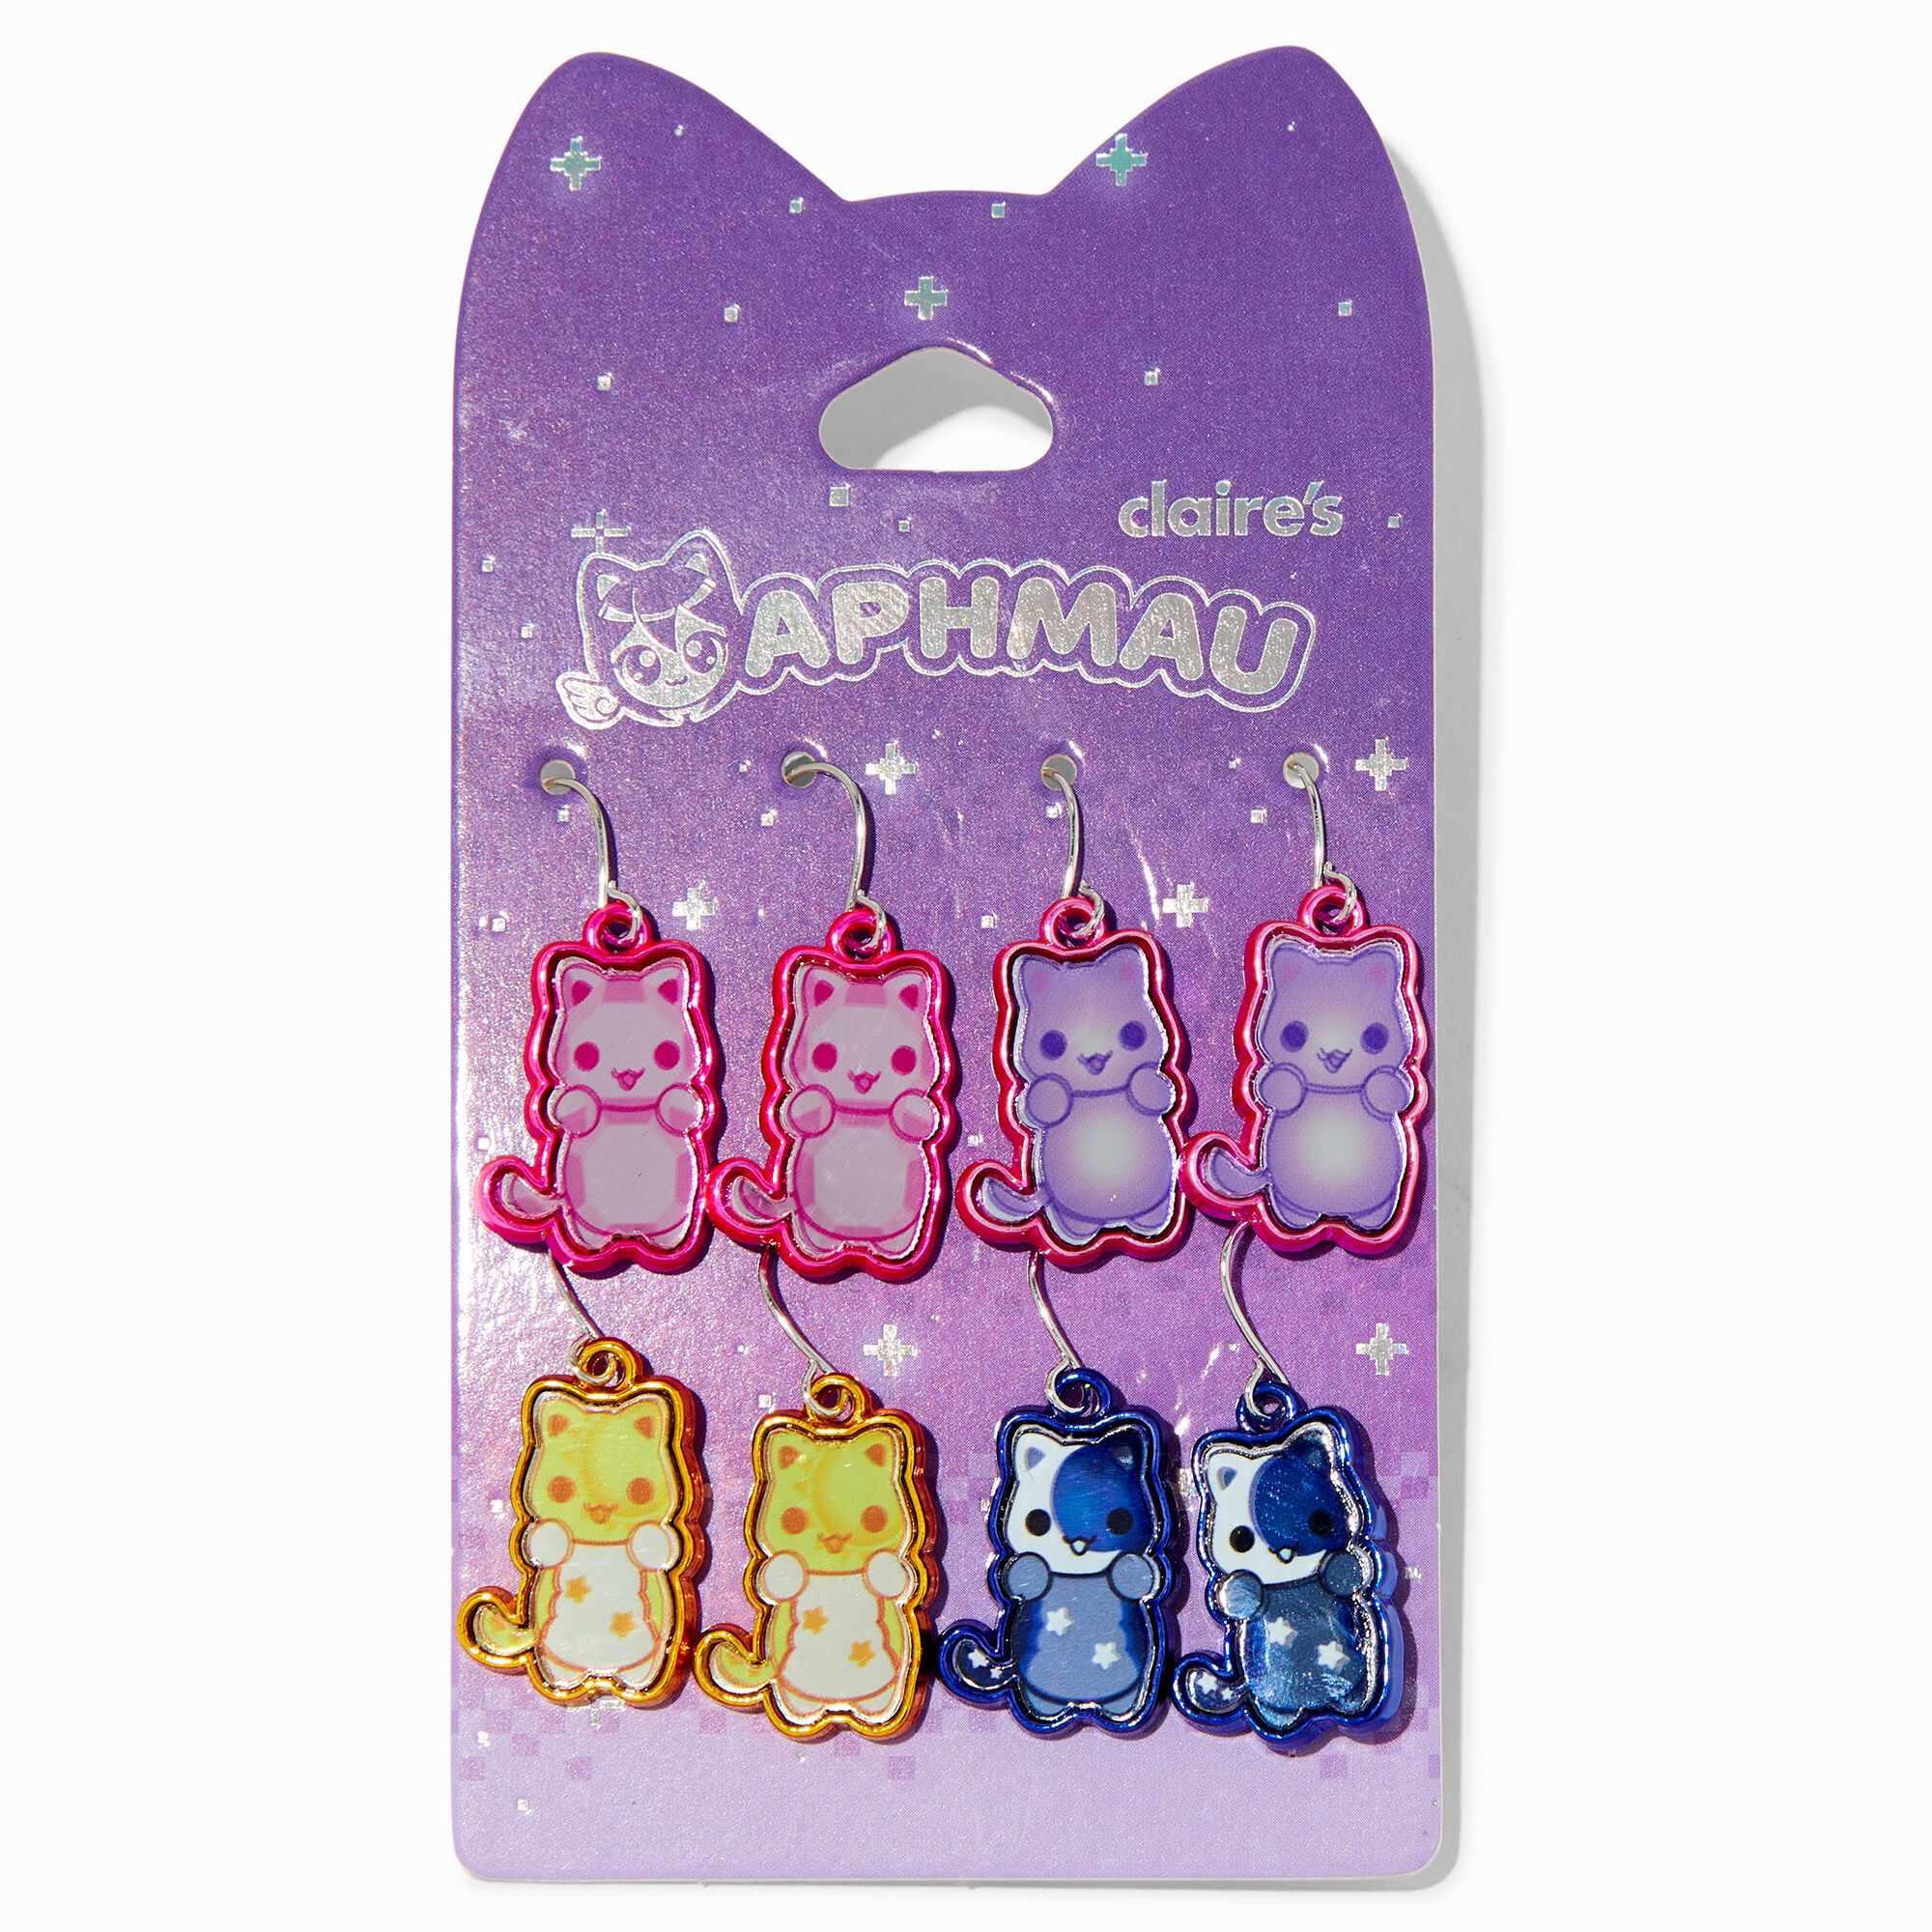 View Aphmau Claires Exclusive Meemeow 1 Drop Earrings 4 Pack Rainbow information